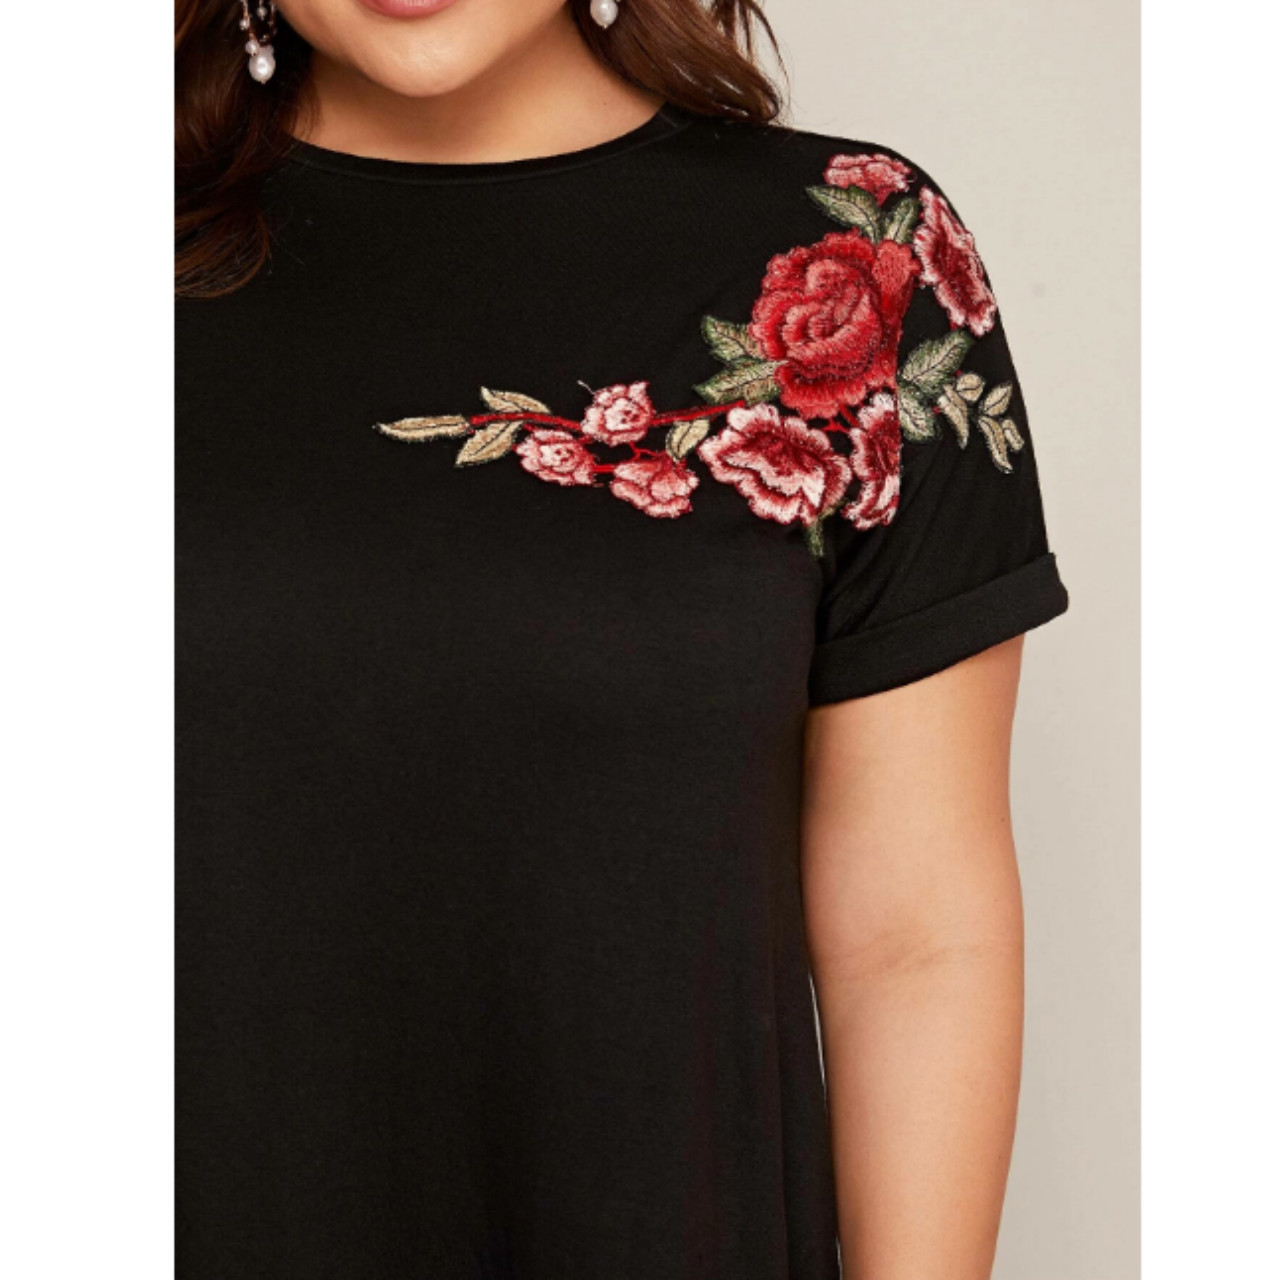 Plus embroidered rose patch tee dress 3xl